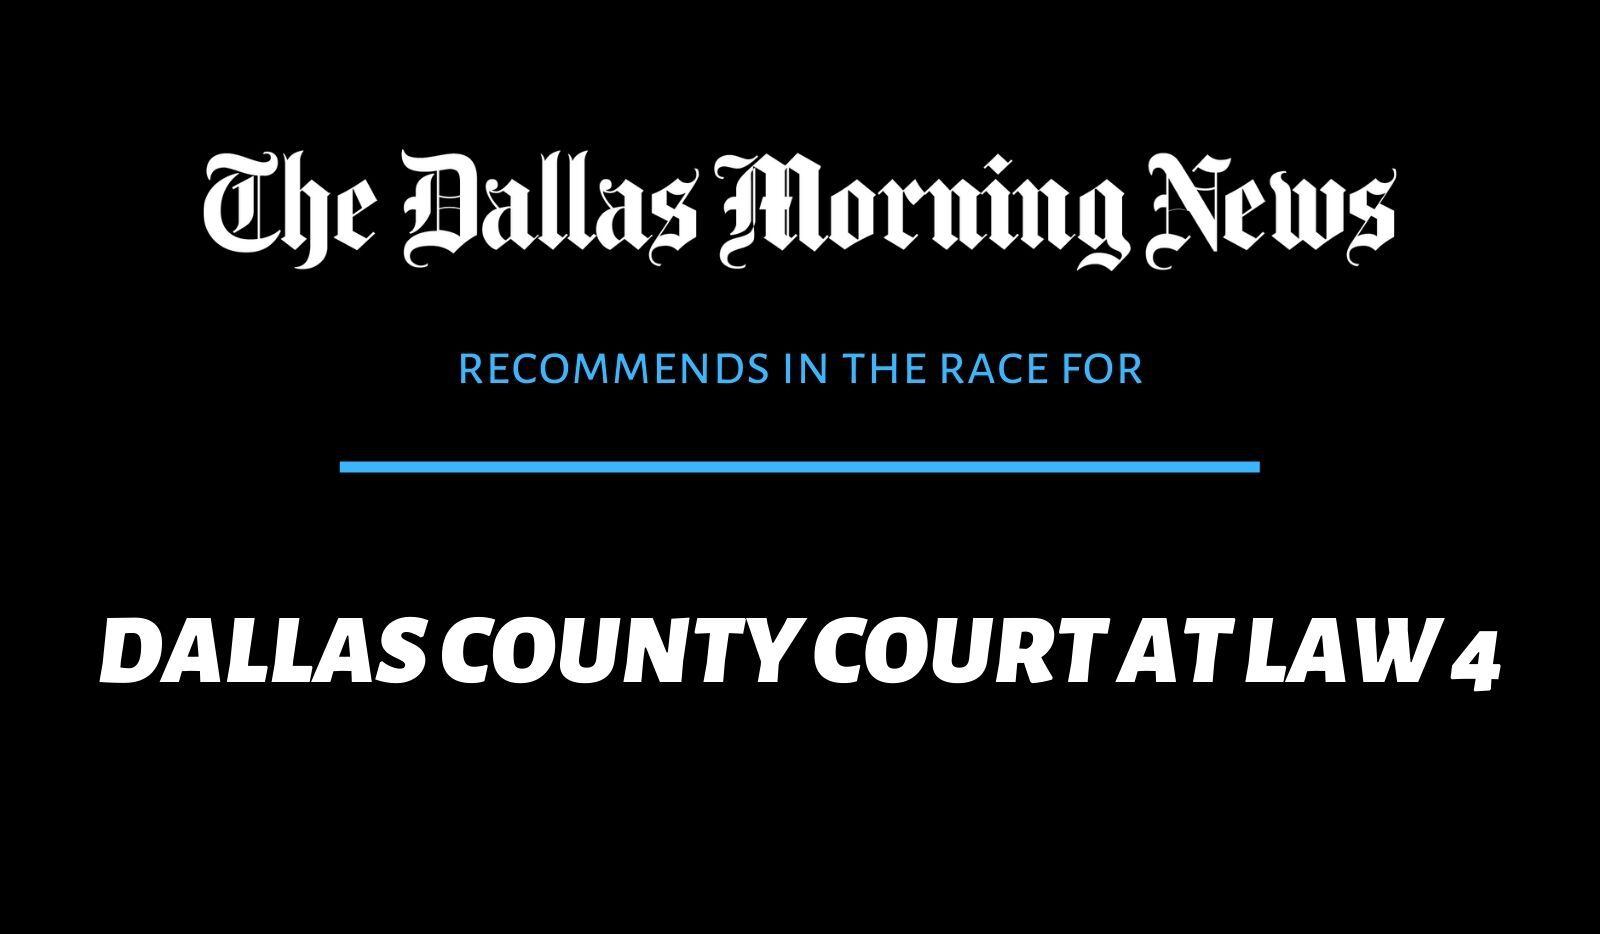 We recommend in Dallas County Court at Law No 4